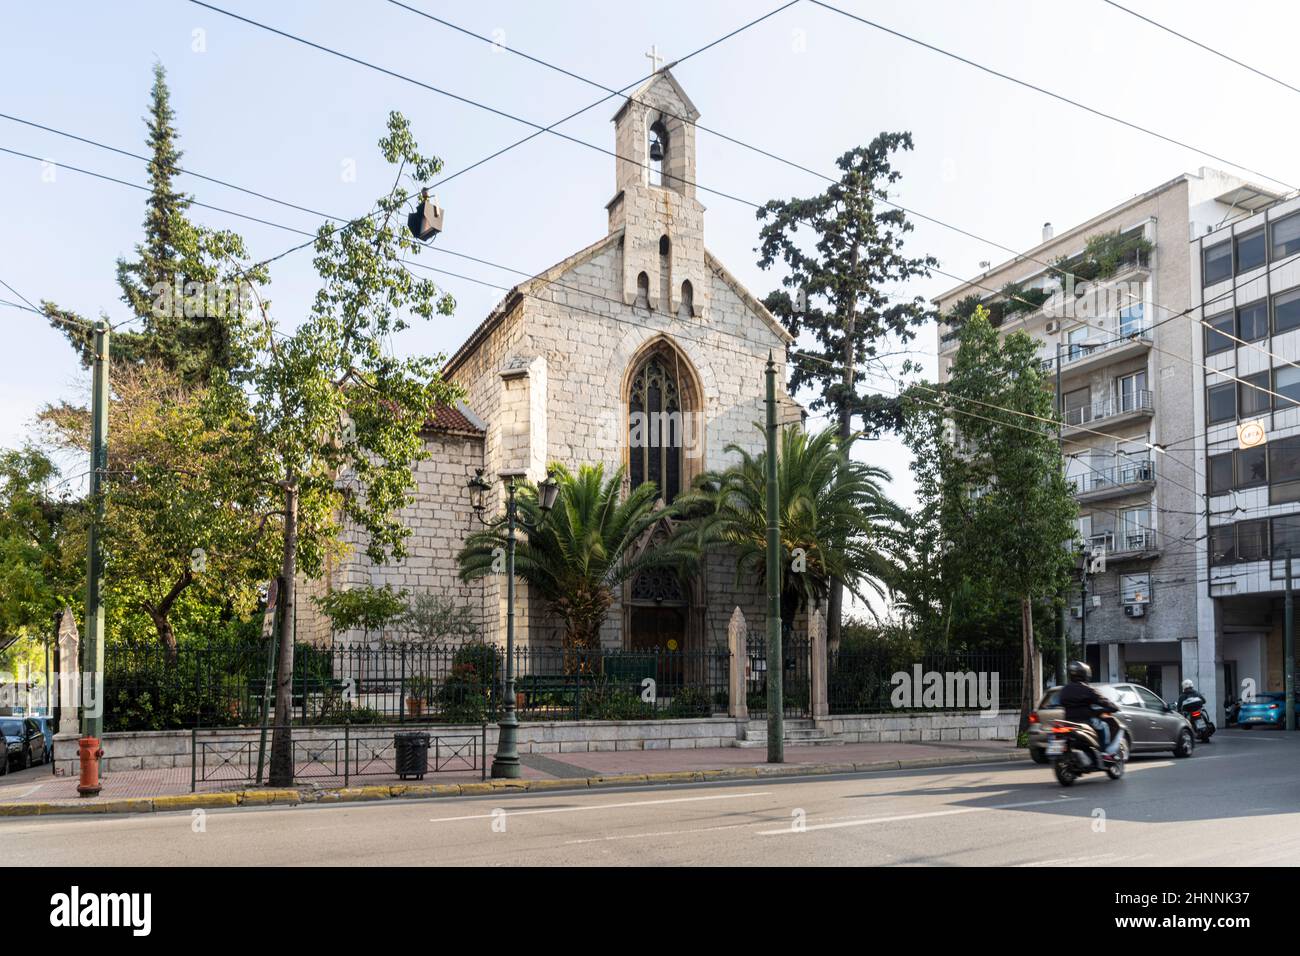 St. Paul's Anglican Church in Athens, Griechenland Stockfoto